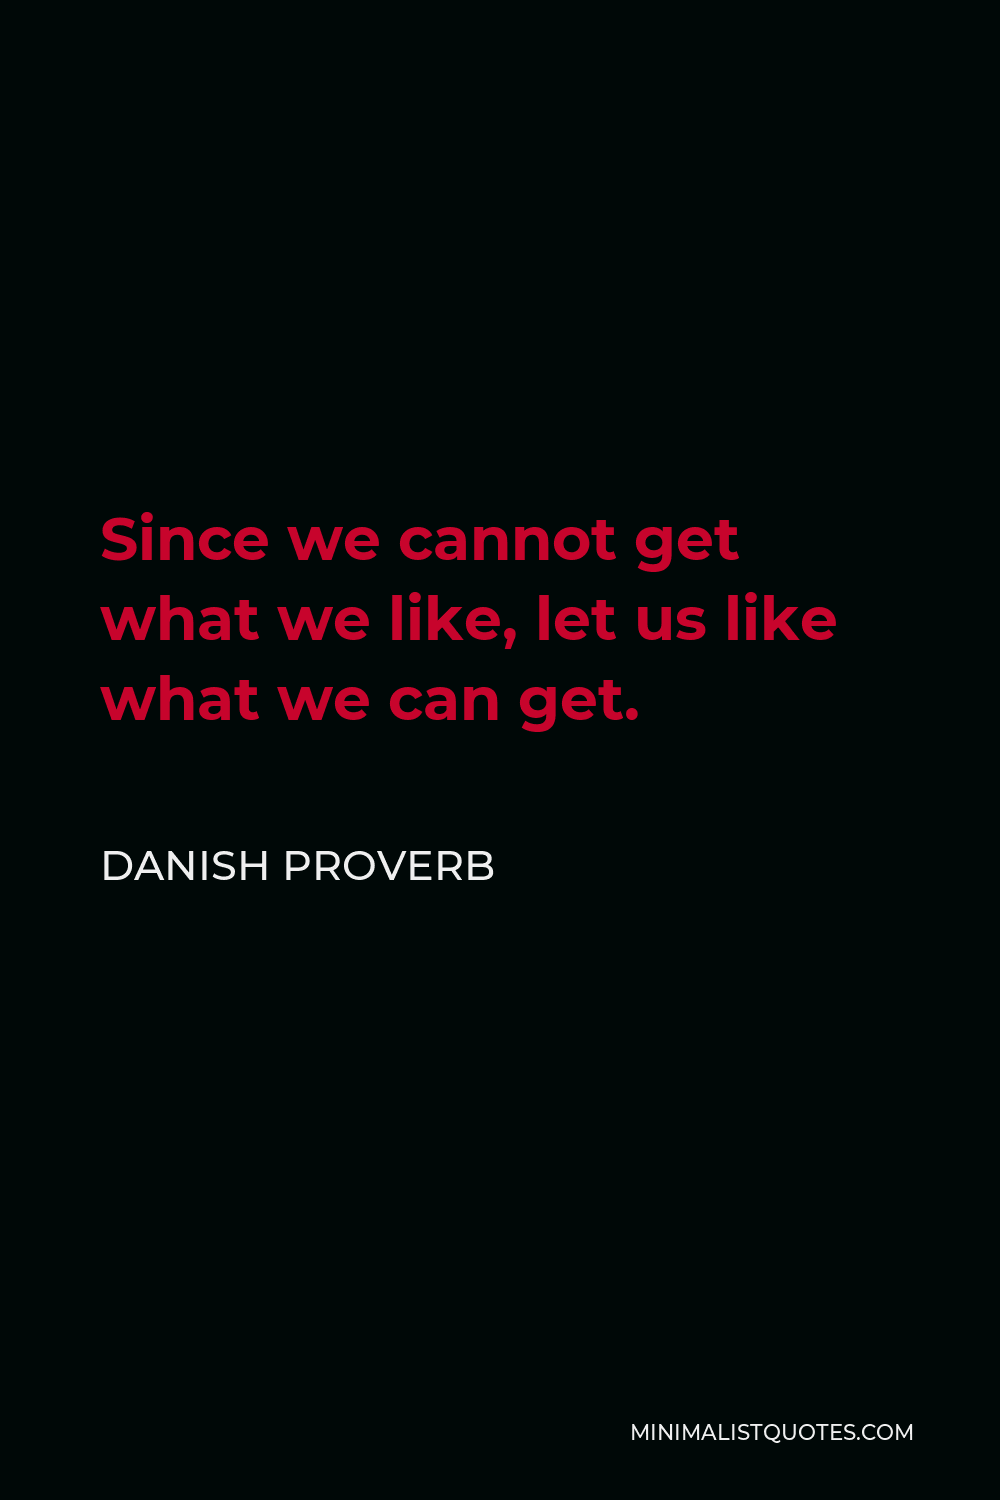 Danish Proverb Quote - Since we cannot get what we like, let us like what we can get.